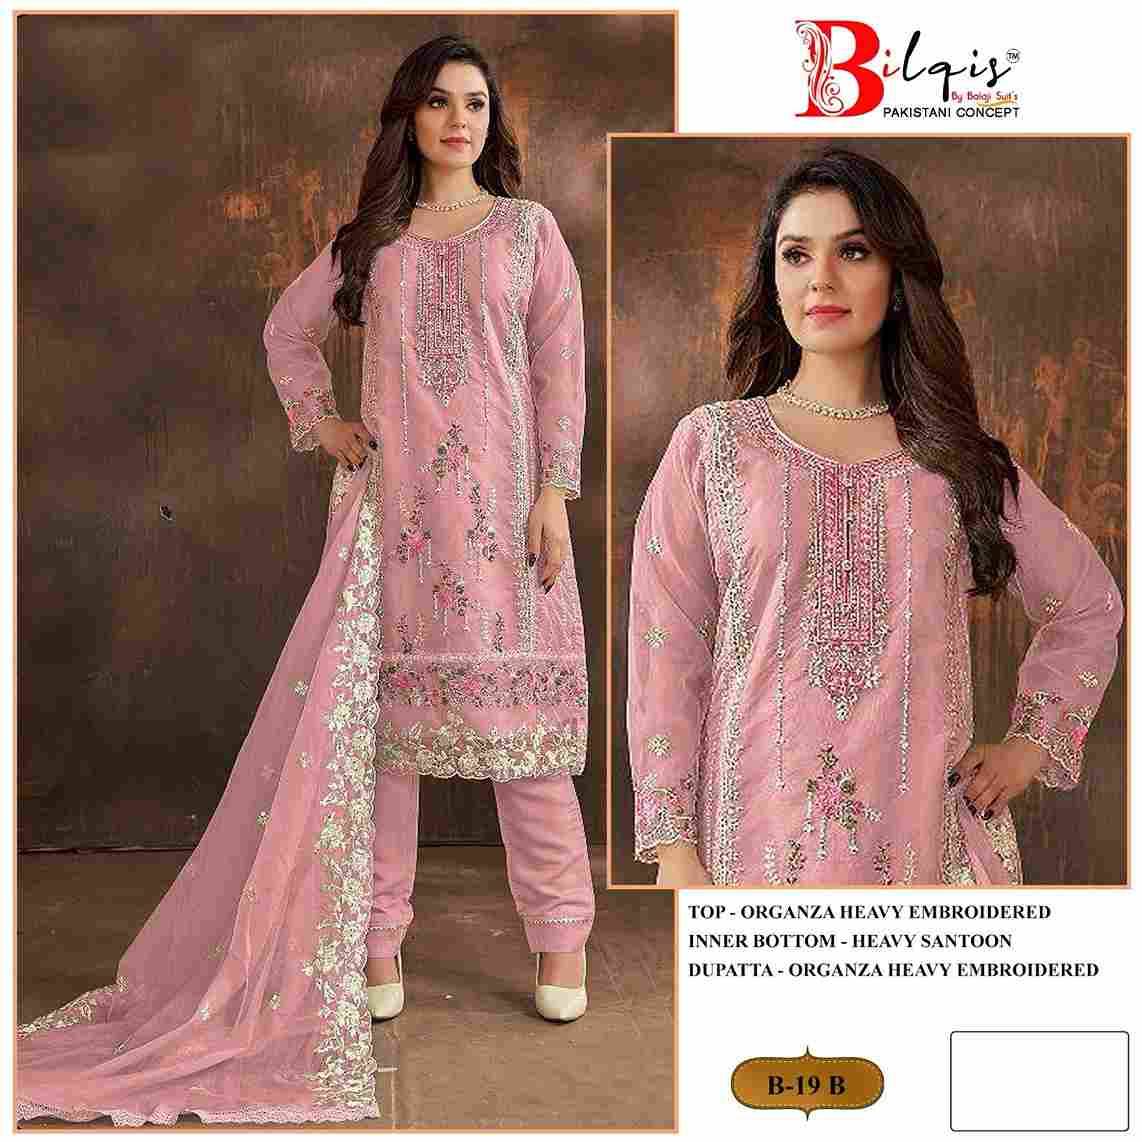 Bilqis 19 Colours By Bilqis 19-A To 19-D Series Beautiful Pakistani Suits Stylish Fancy Colorful Party Wear & Occasional Wear Organza Embroidery Dresses At Wholesale Price